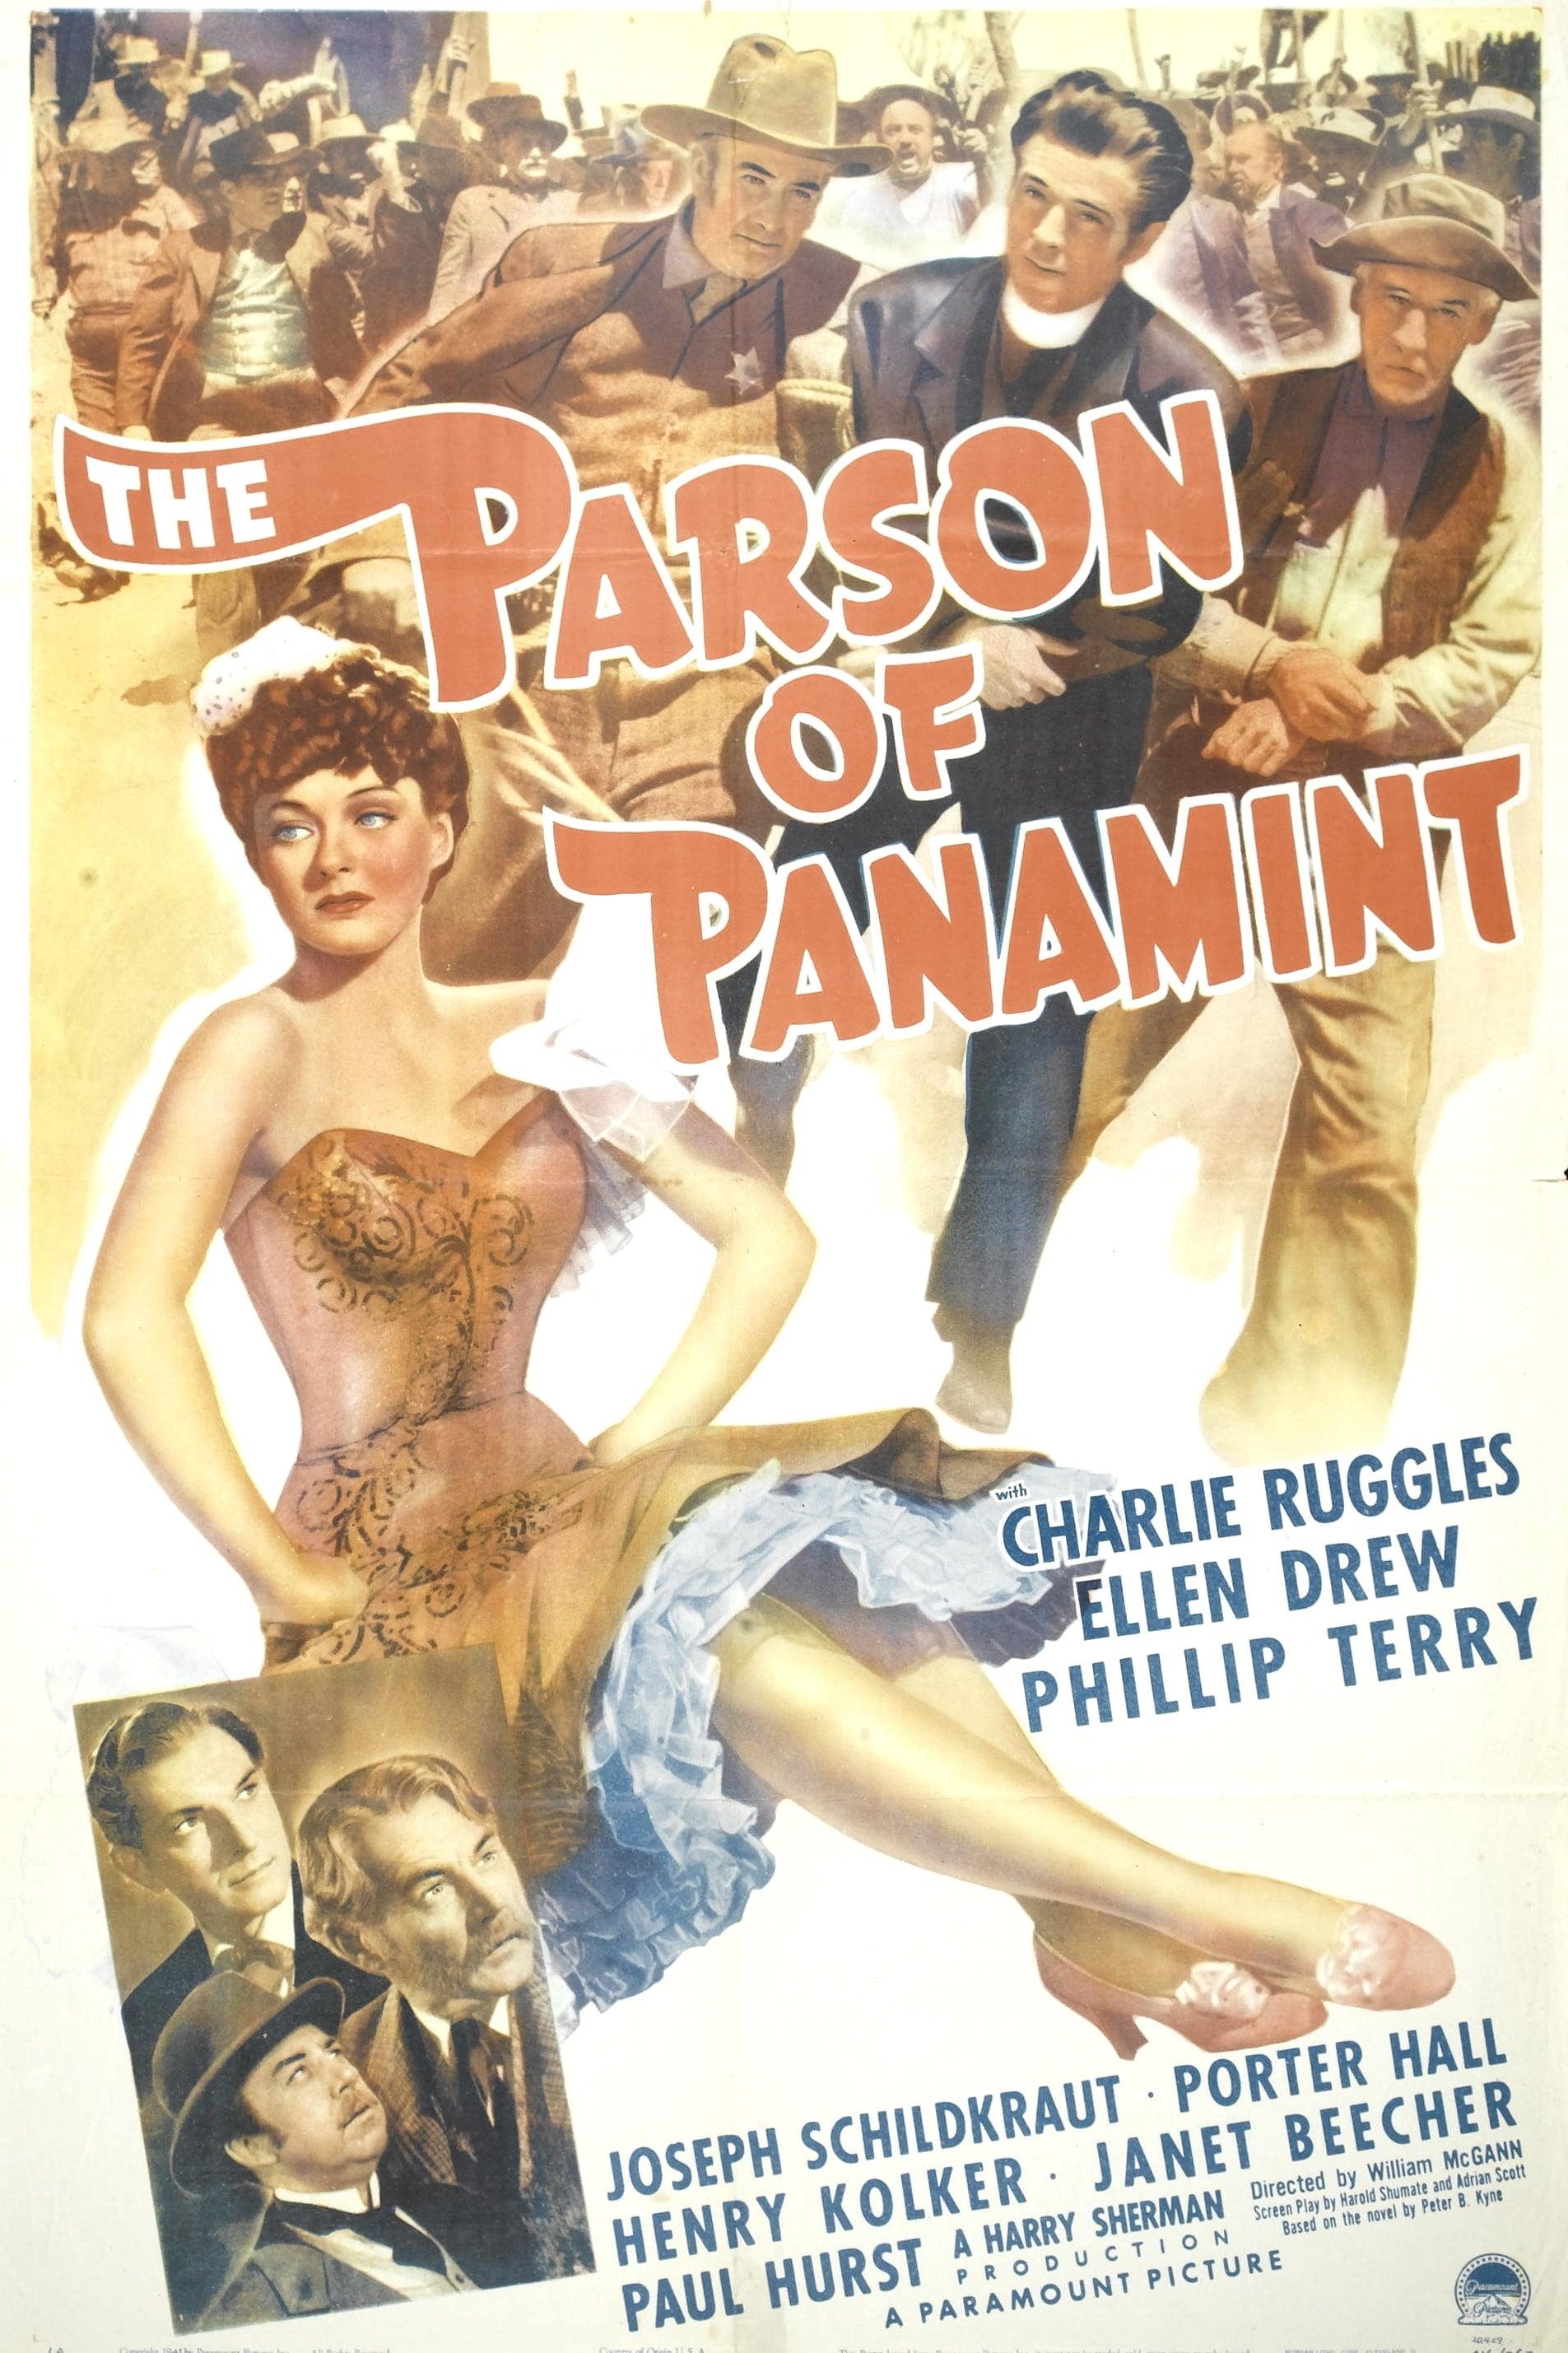 The Parson of Panamint poster